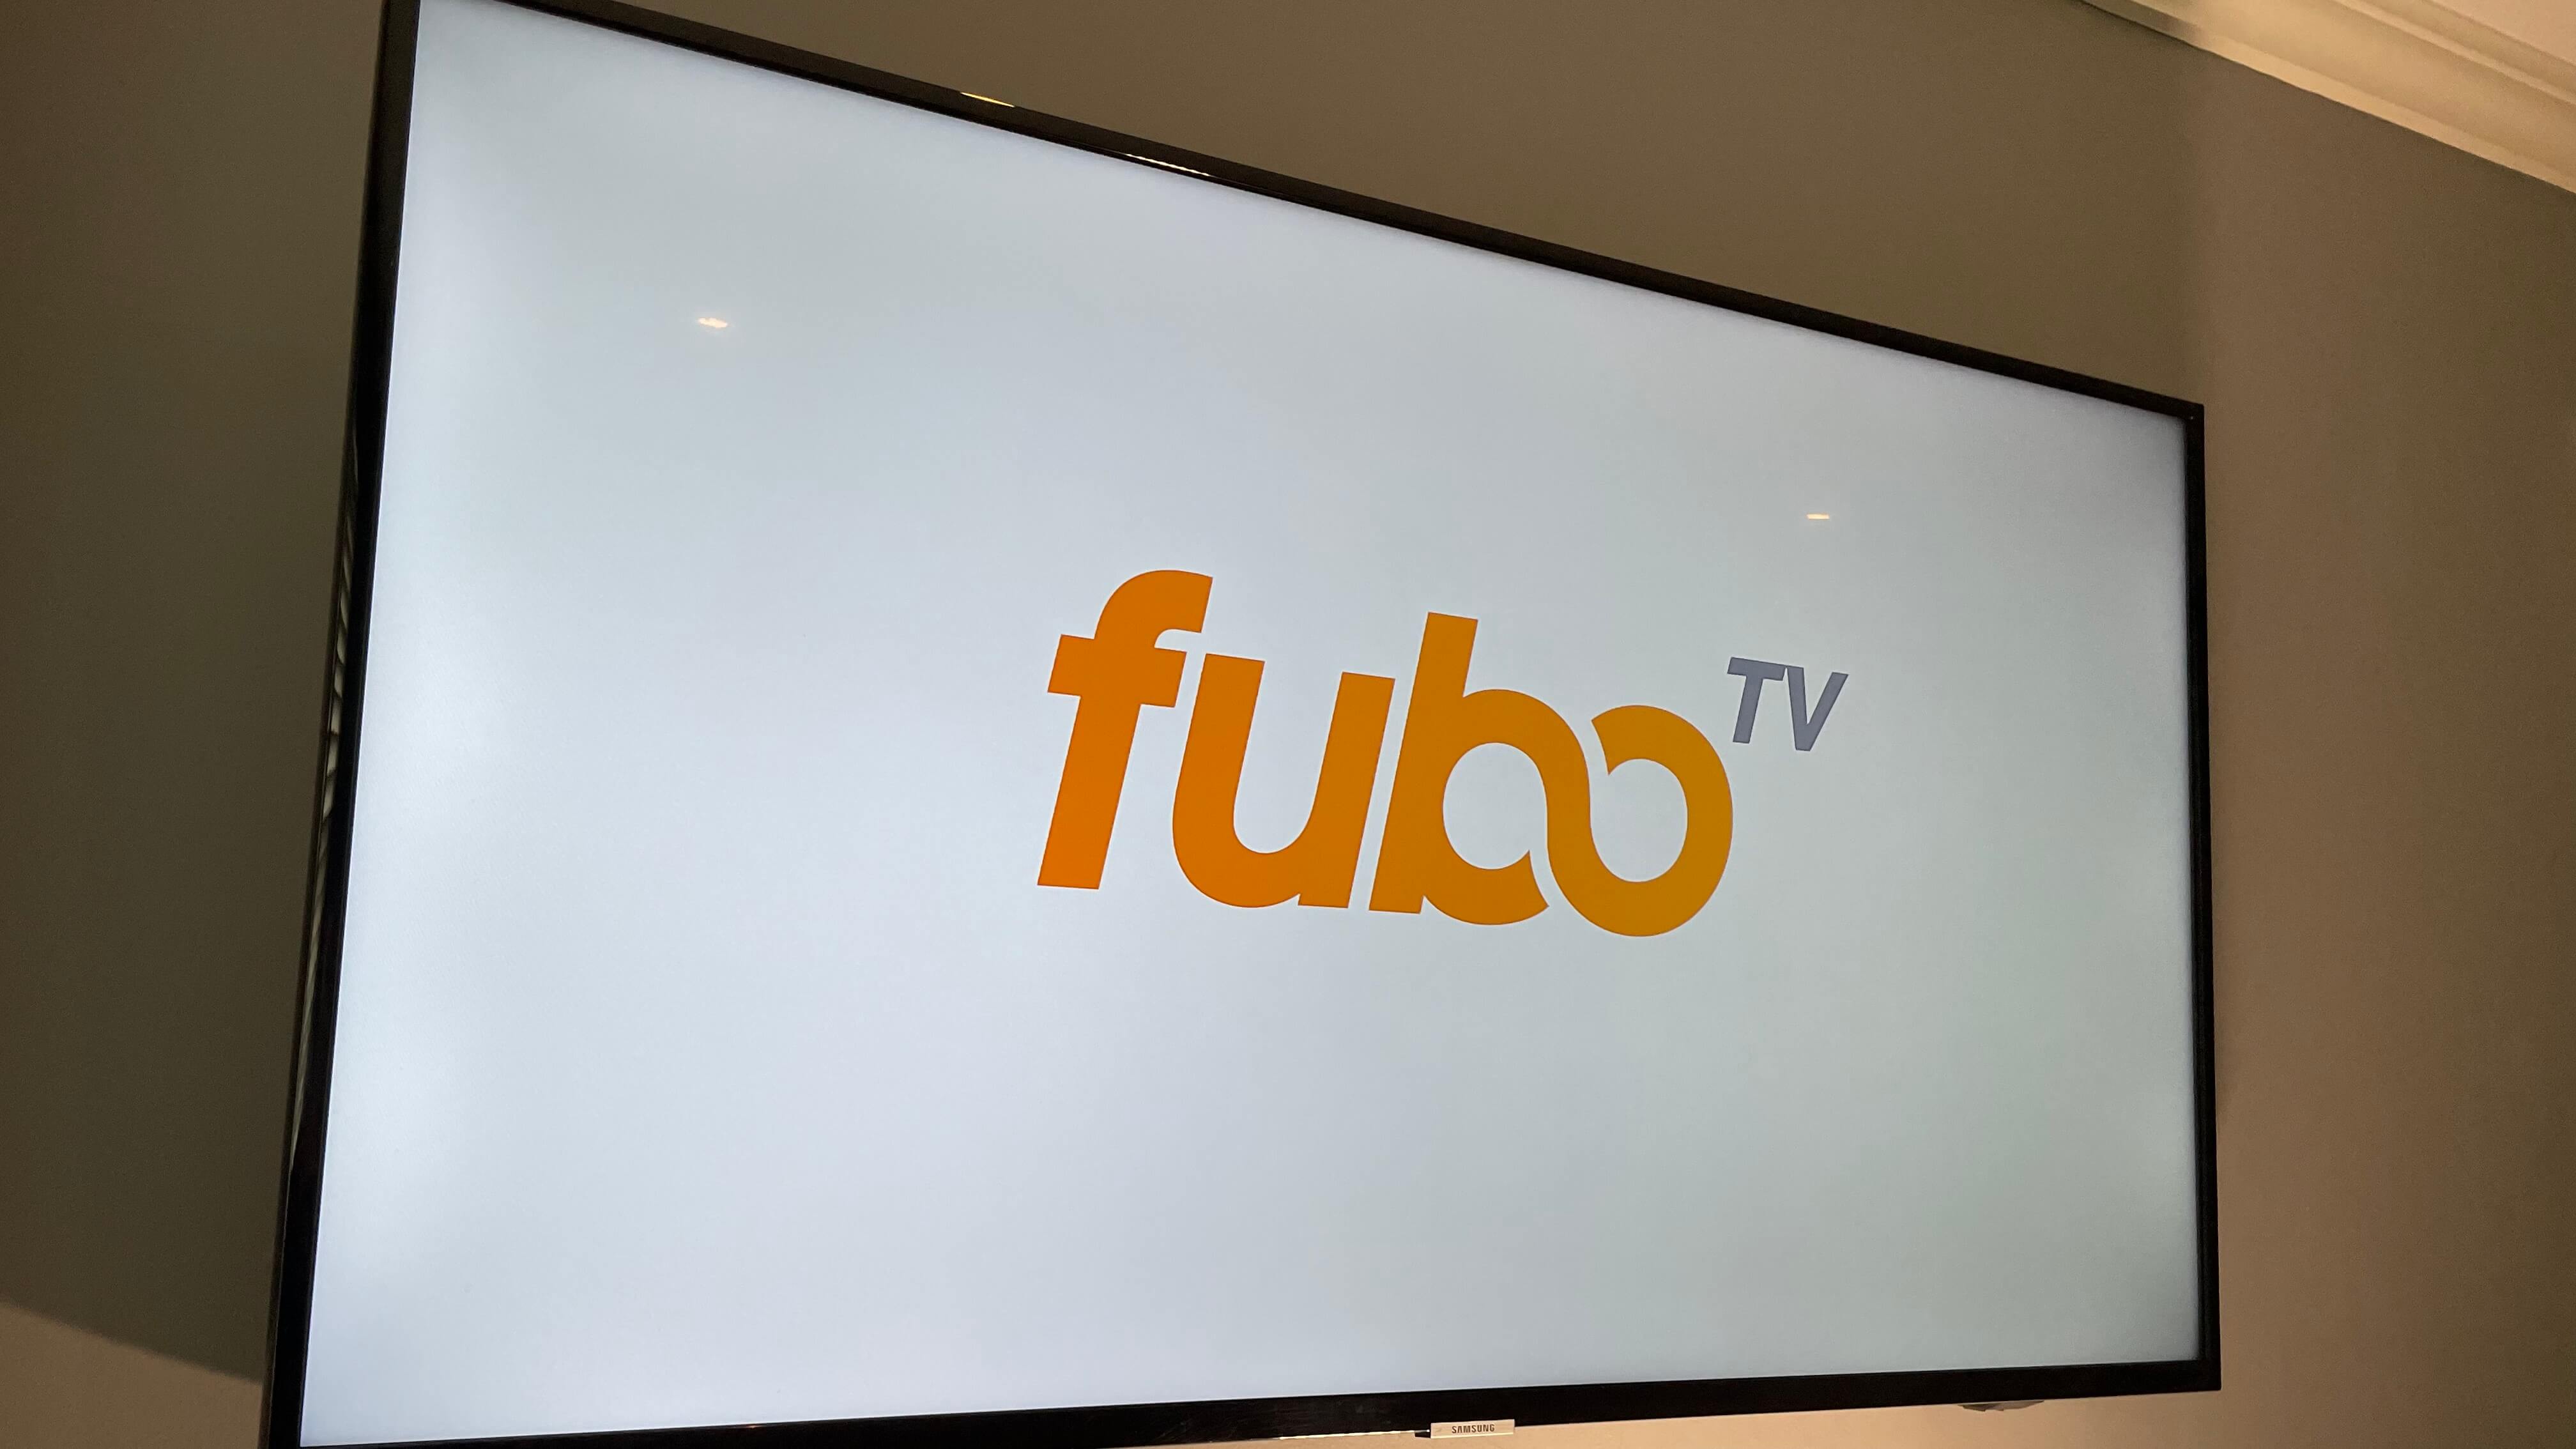 A Complete Guide to Fubo's Packages and Pricing 2023